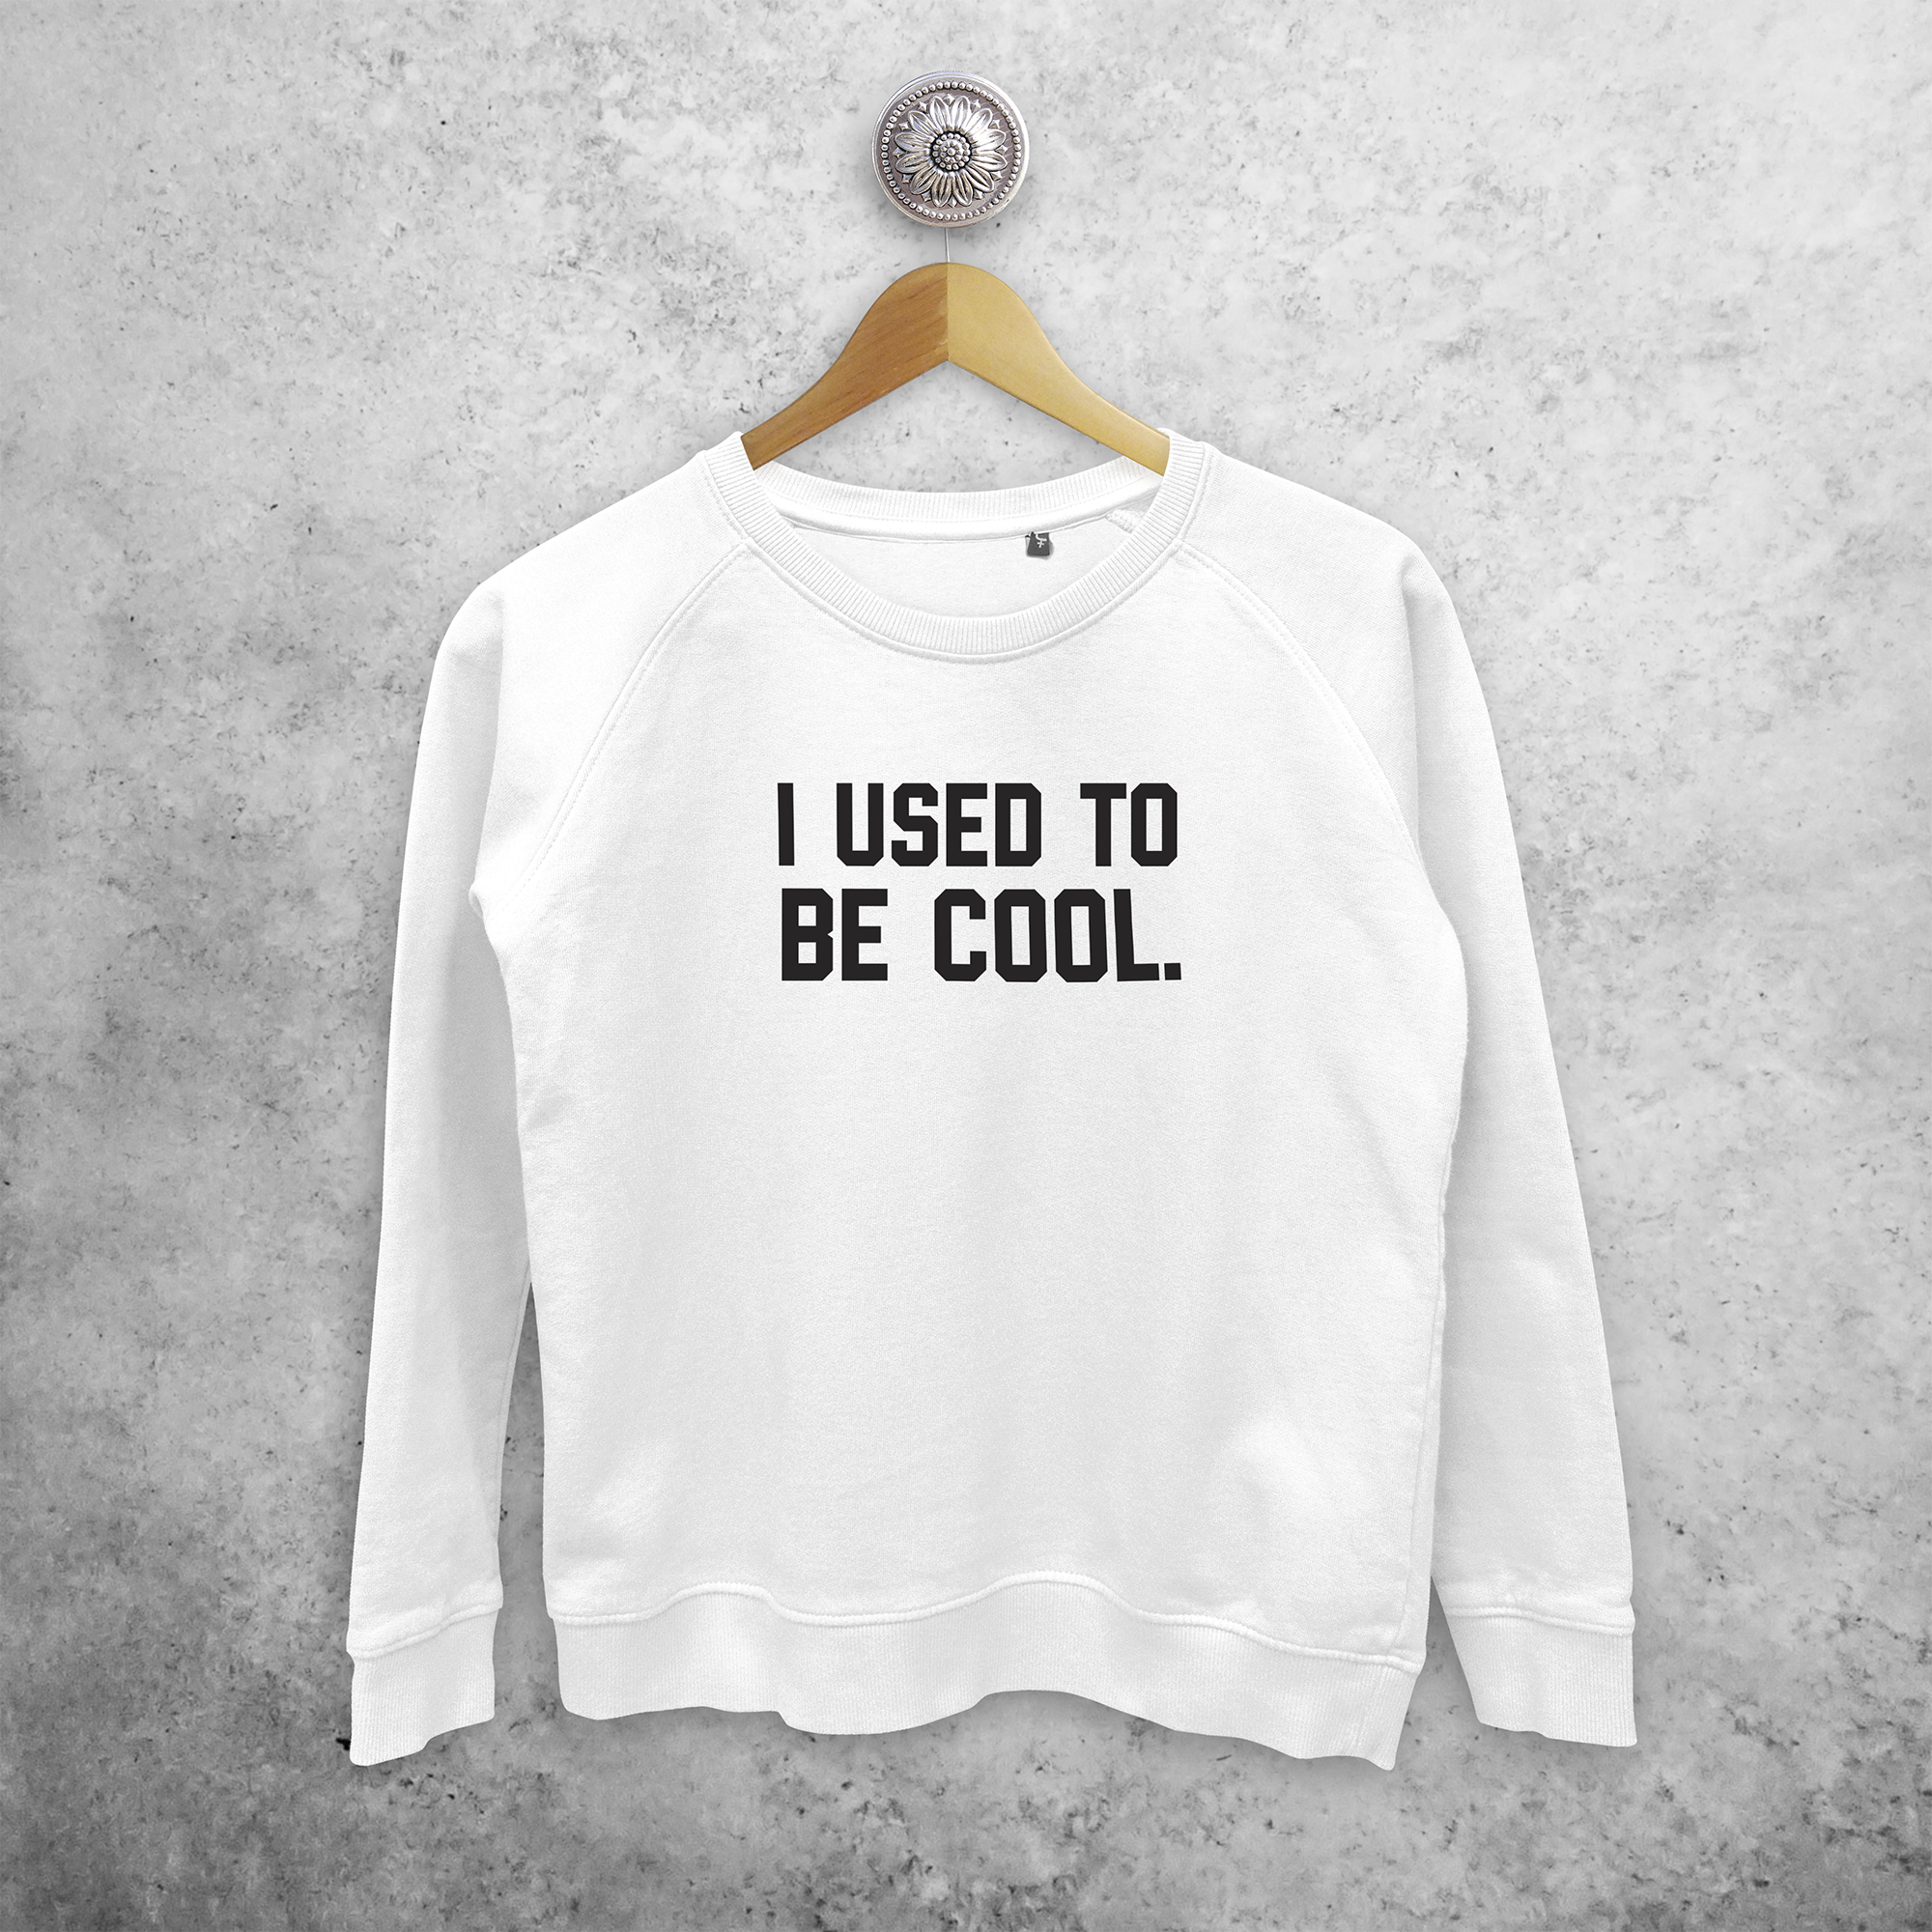 'I used to be cool' sweater